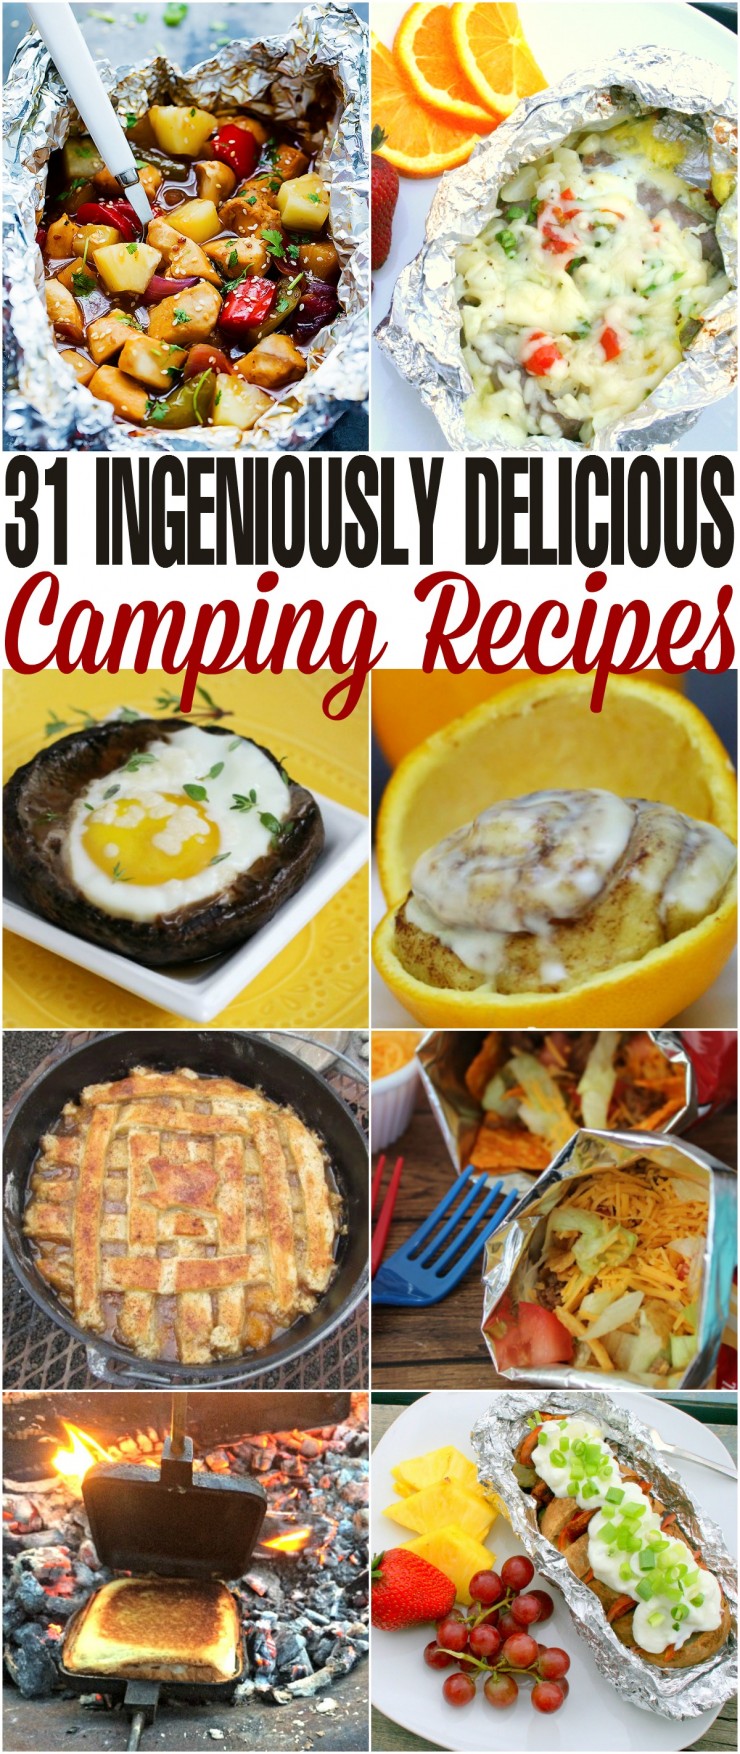 31 camping recipes from breakfast to dessert that are so ingenious they are sure to stun you with their ease and flavour! 